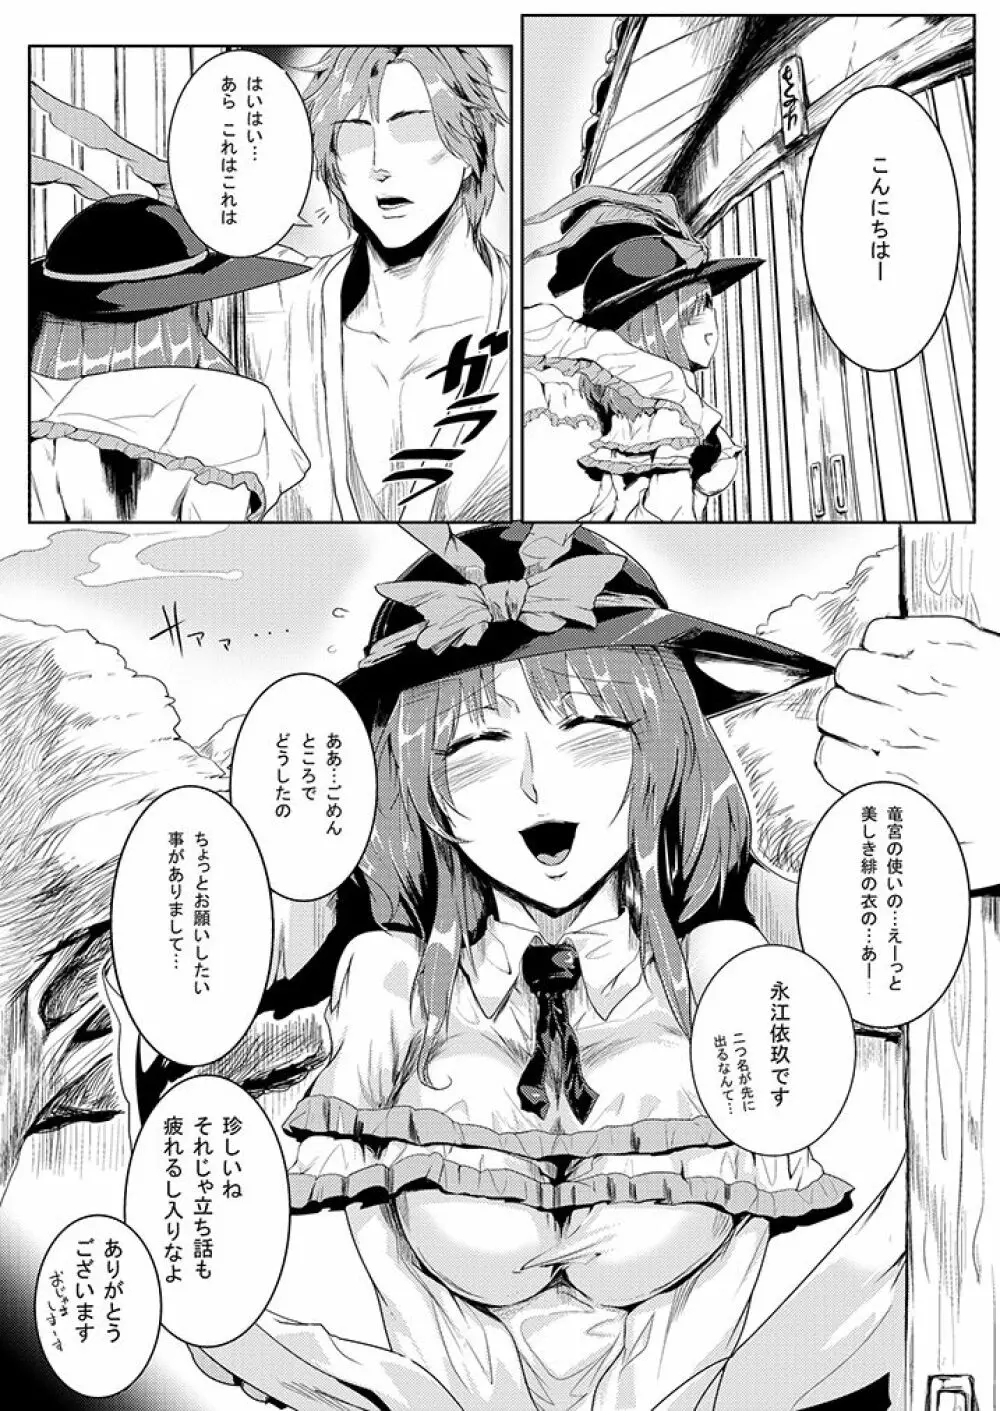 SAKUYA MAID in HEAVEN/ALL IN 1 - page417